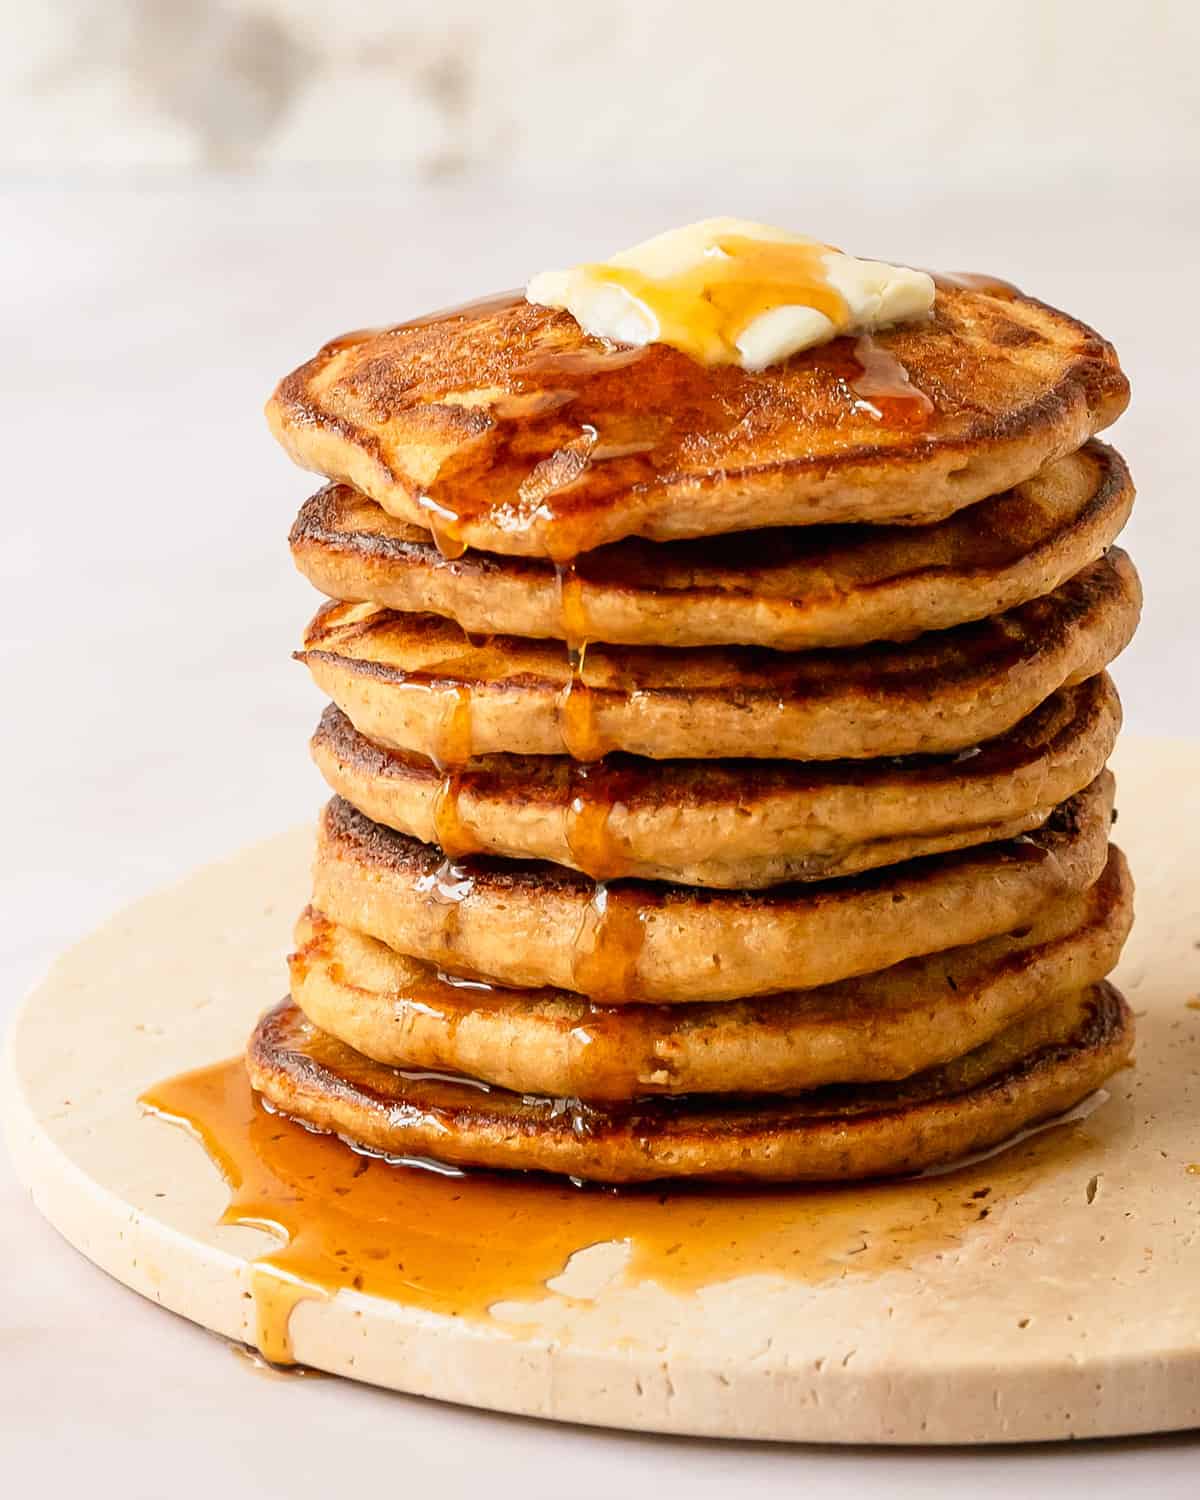 Oat flour pancakes are are so irresistibly light, fluffy and delicious, you’d never know they are also naturally gluten free. Learn how to make these quick and easy oatmeal flour pancakes using basic pantry ingredients. They make the perfect cozy breakfast everyone will love!